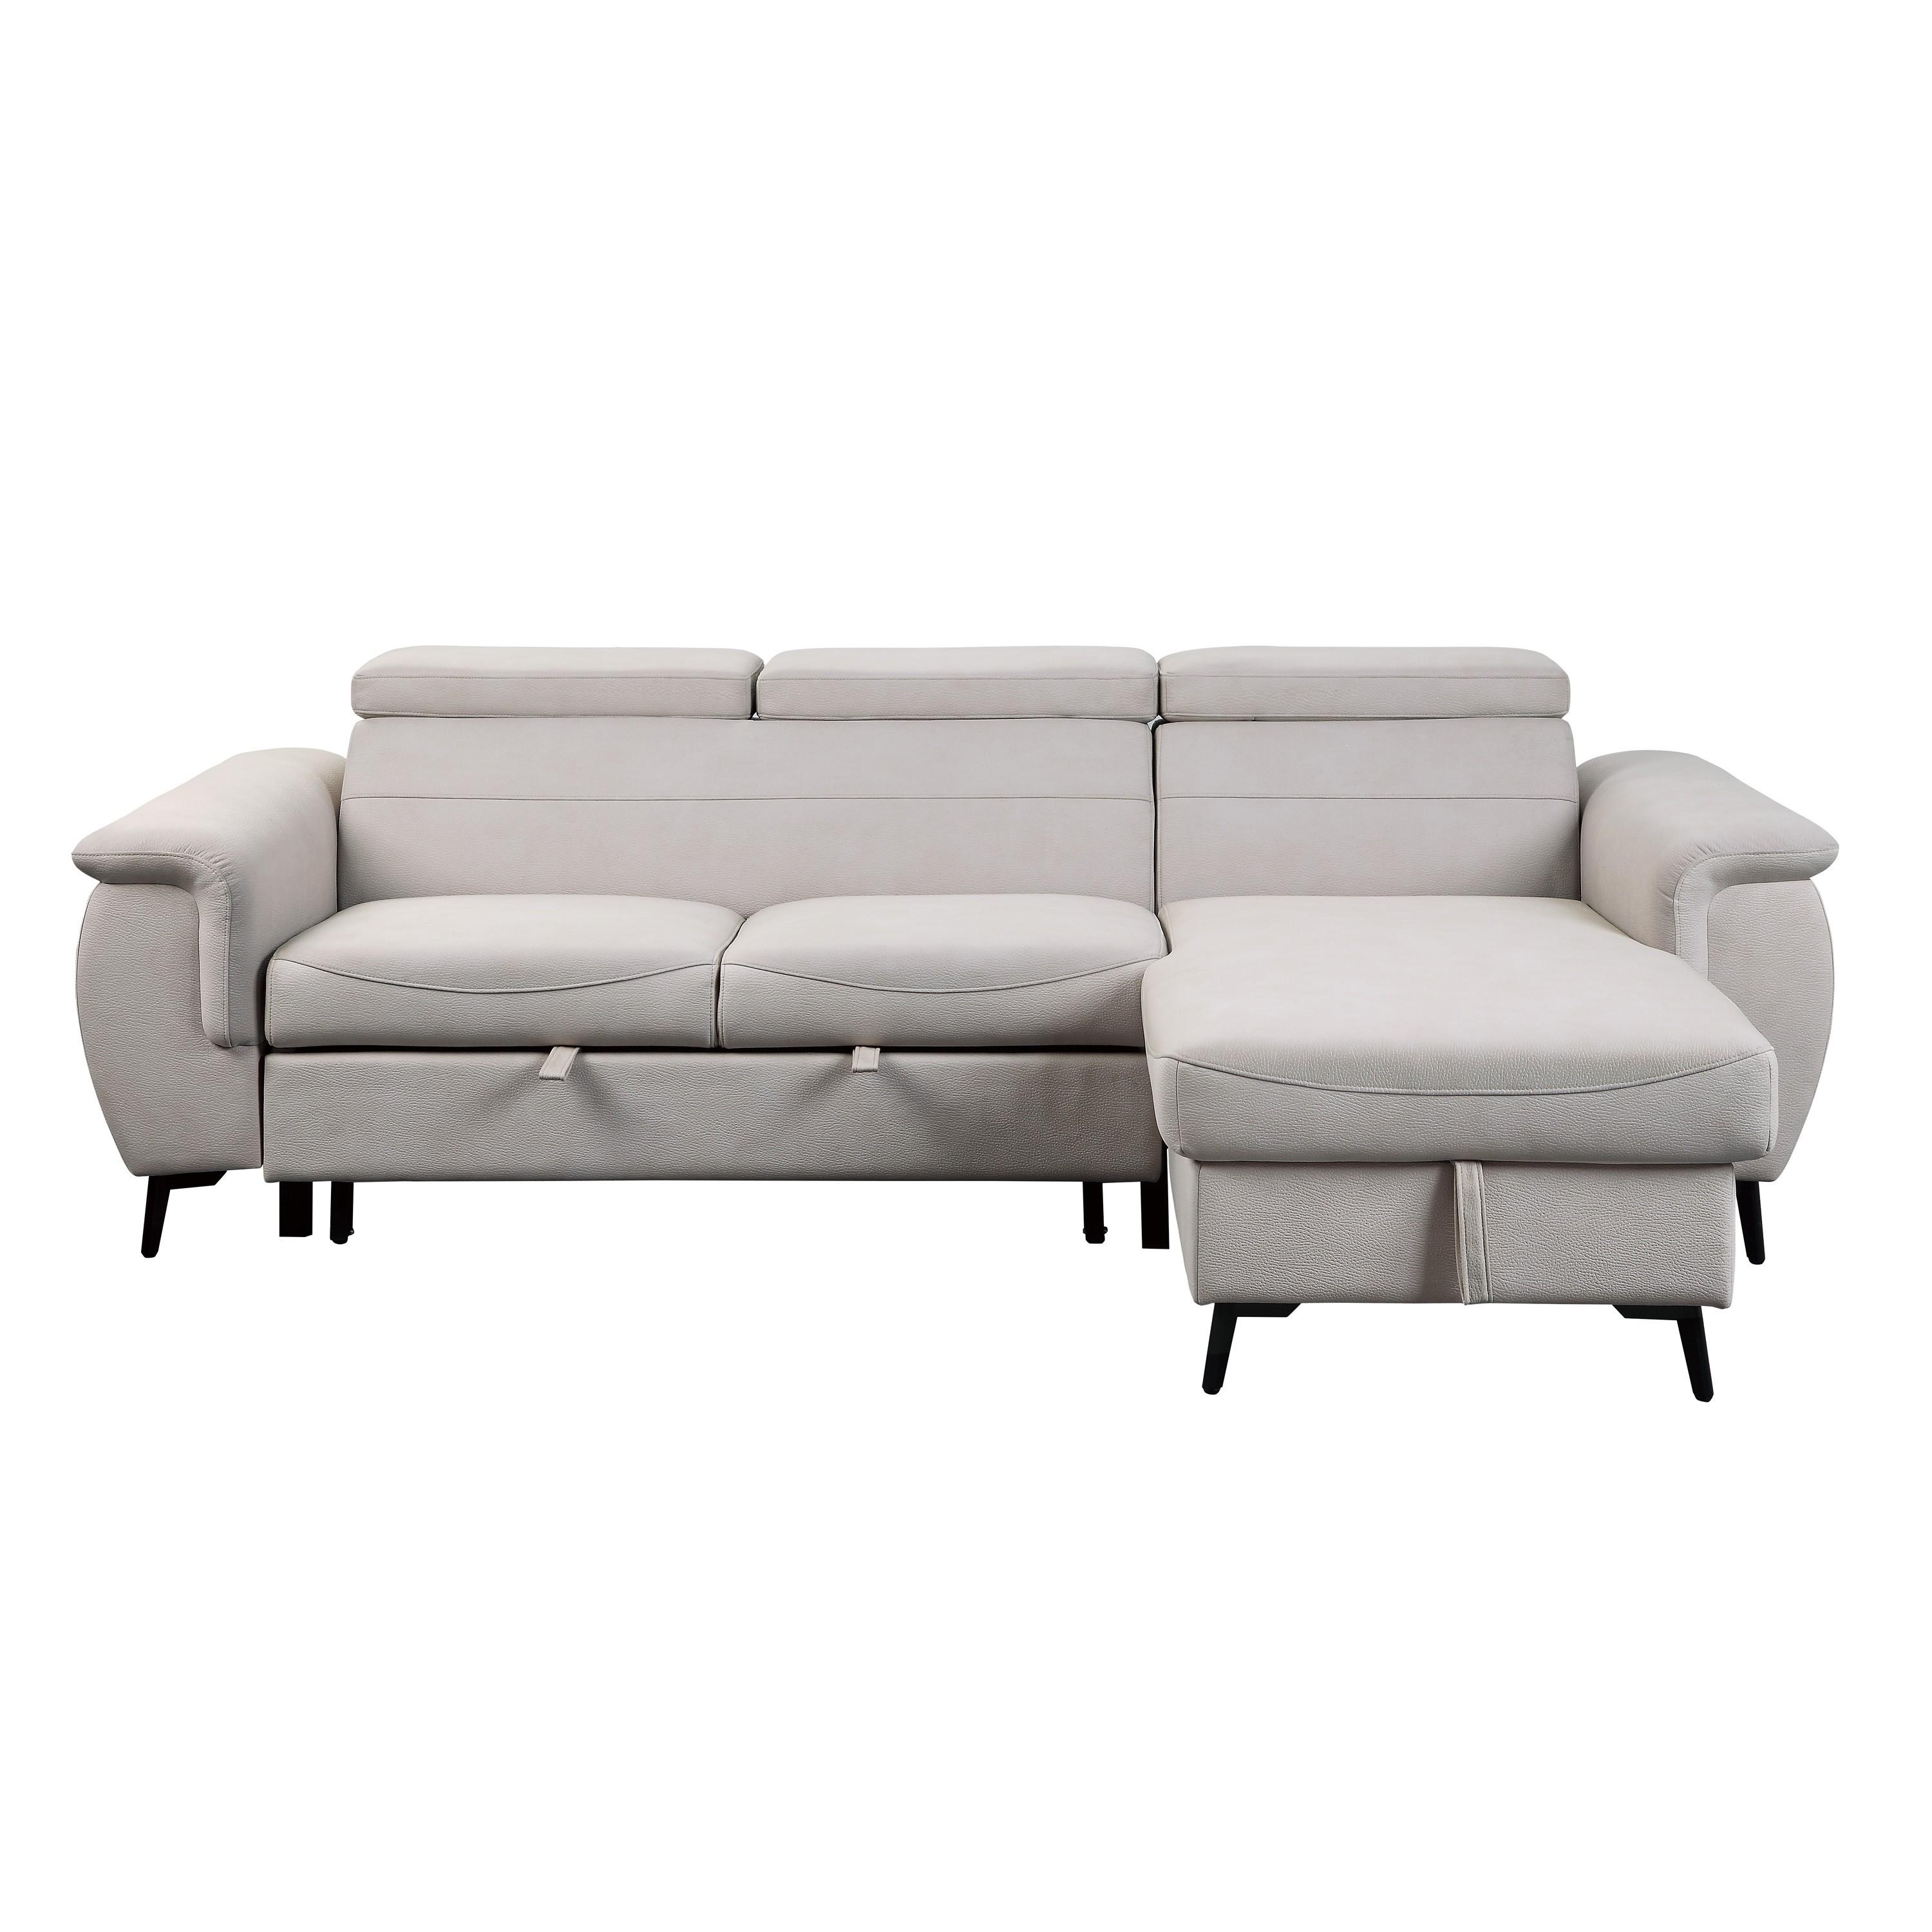 Modern Sectional Sofa 9403BE*SC Cadence 9403BE*SC in Beige Microfiber